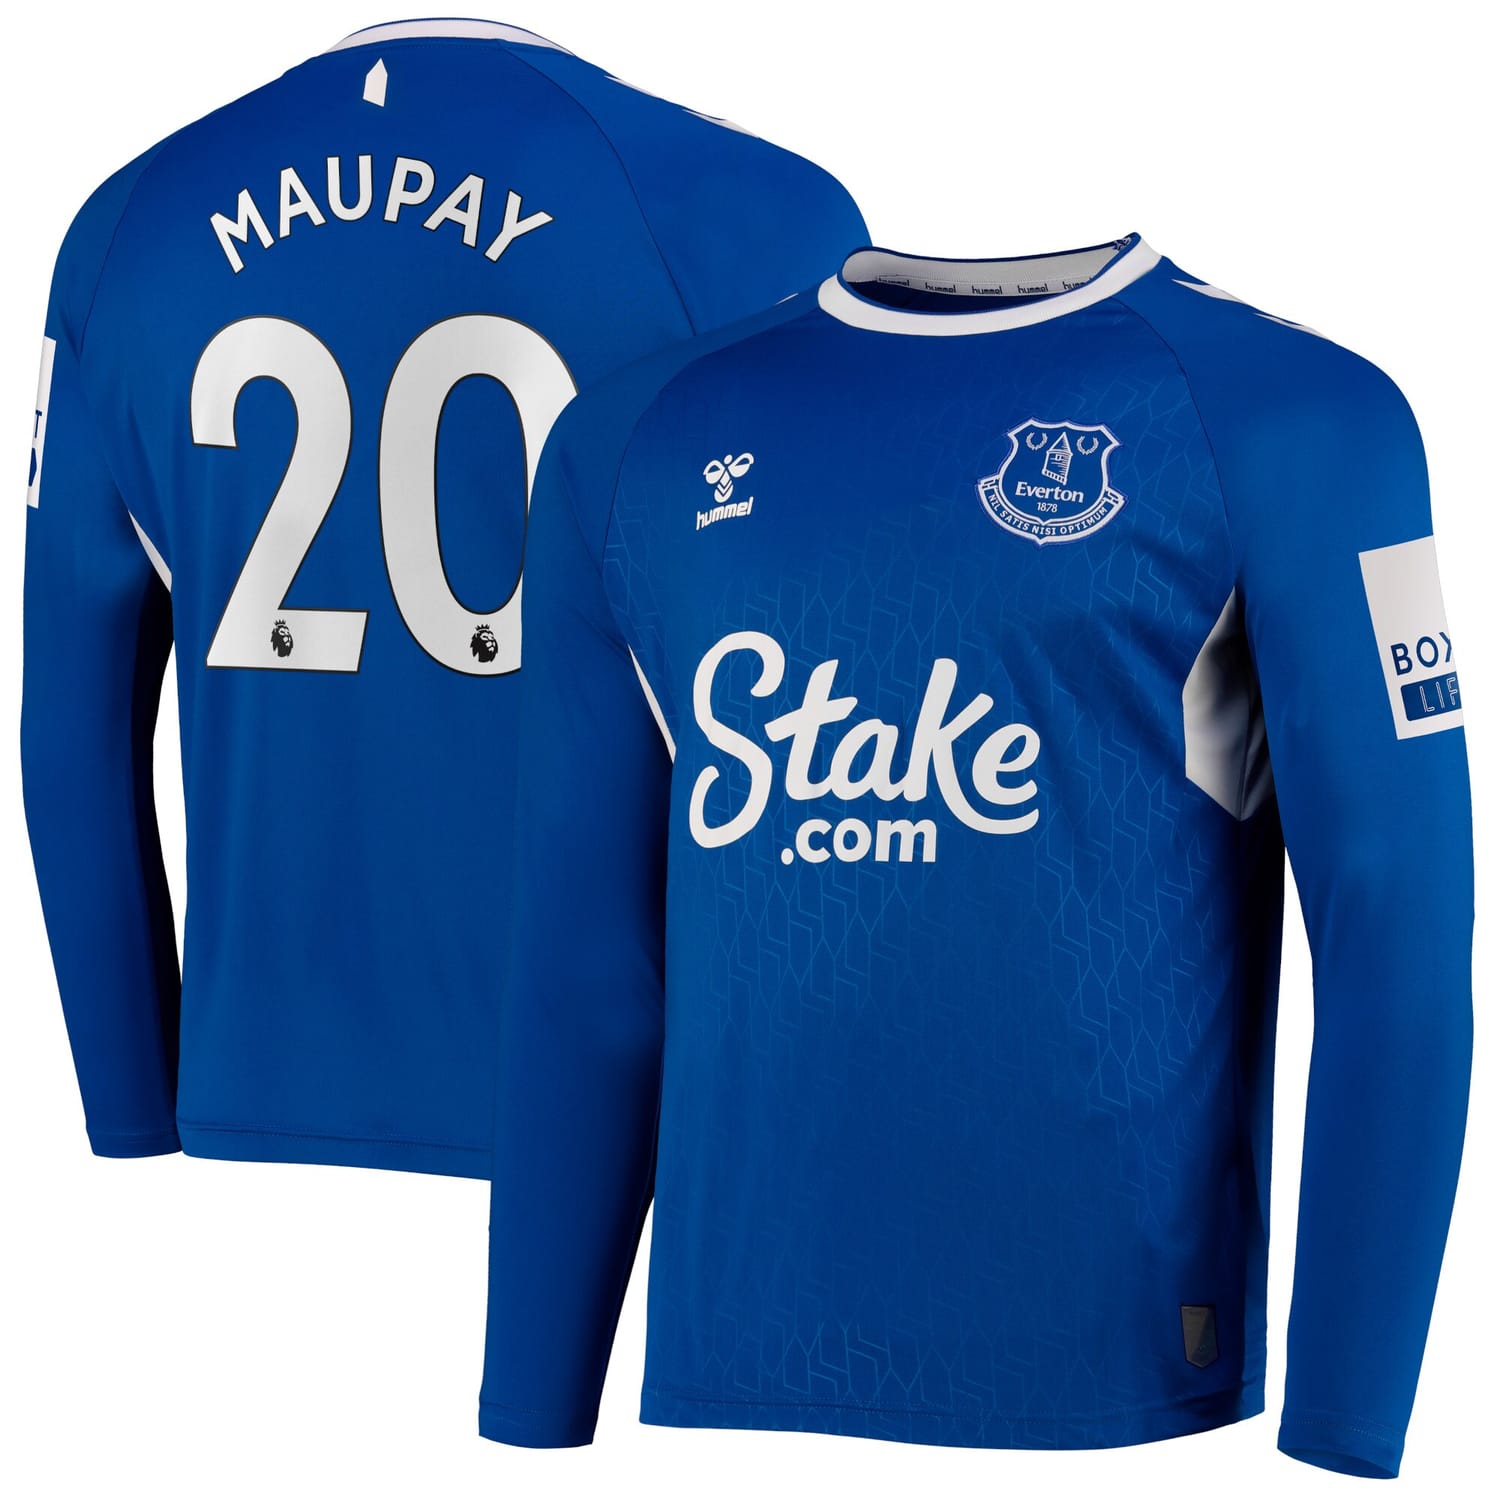 Premier League Everton Home Jersey Shirt Long Sleeve 2022-23 player Neal Maupay 20 printing for Men